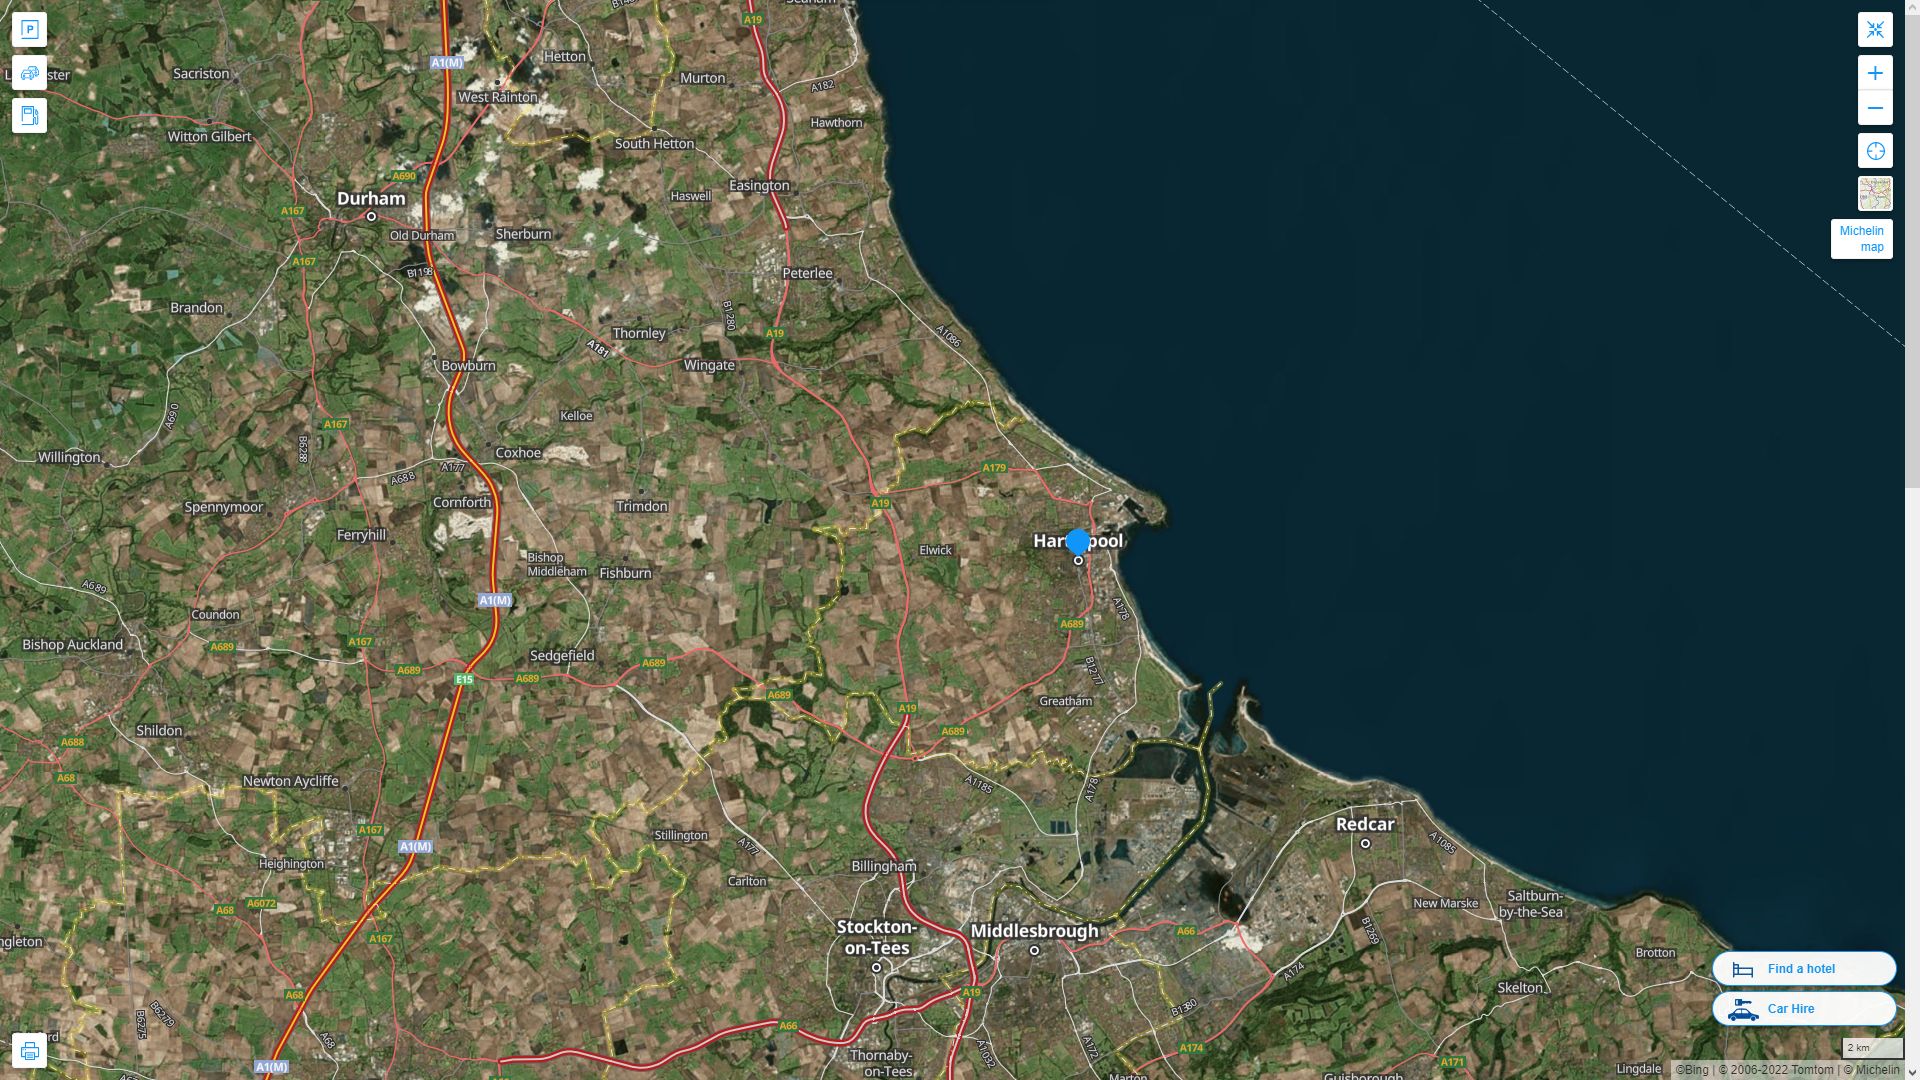 Hartlepool Highway and Road Map with Satellite View